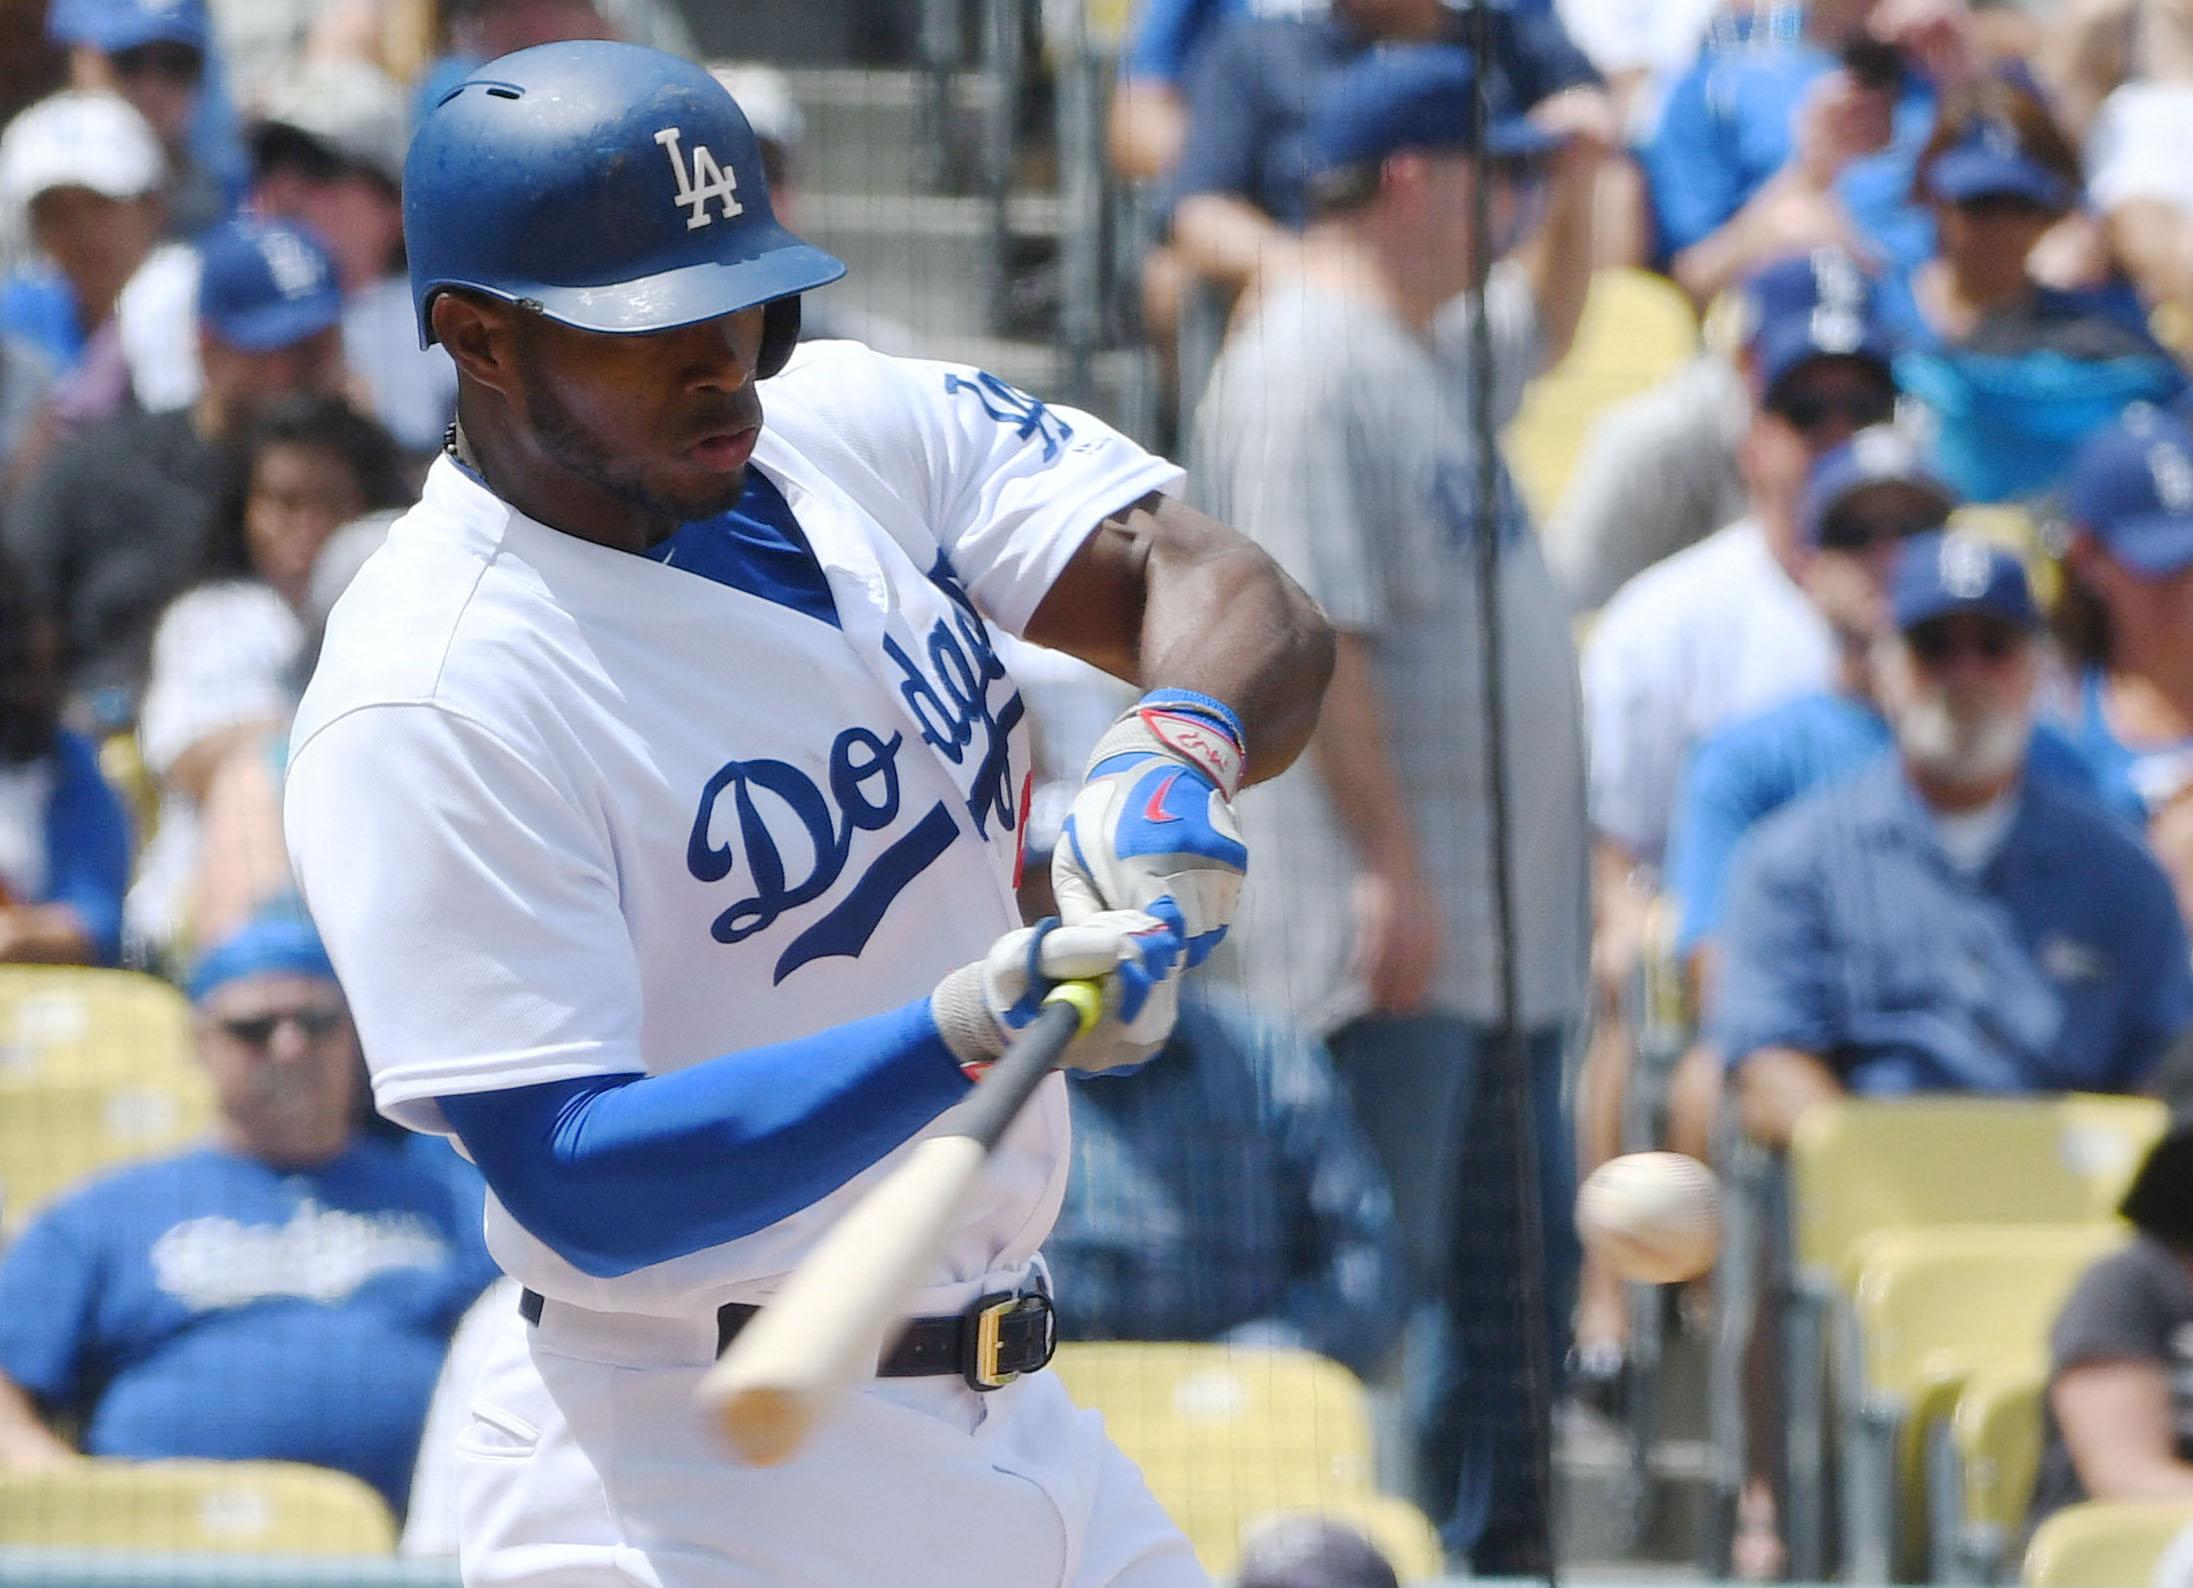 Yasiel Puig's agent: Ex-MLB star felt 'rushed' at probe with feds